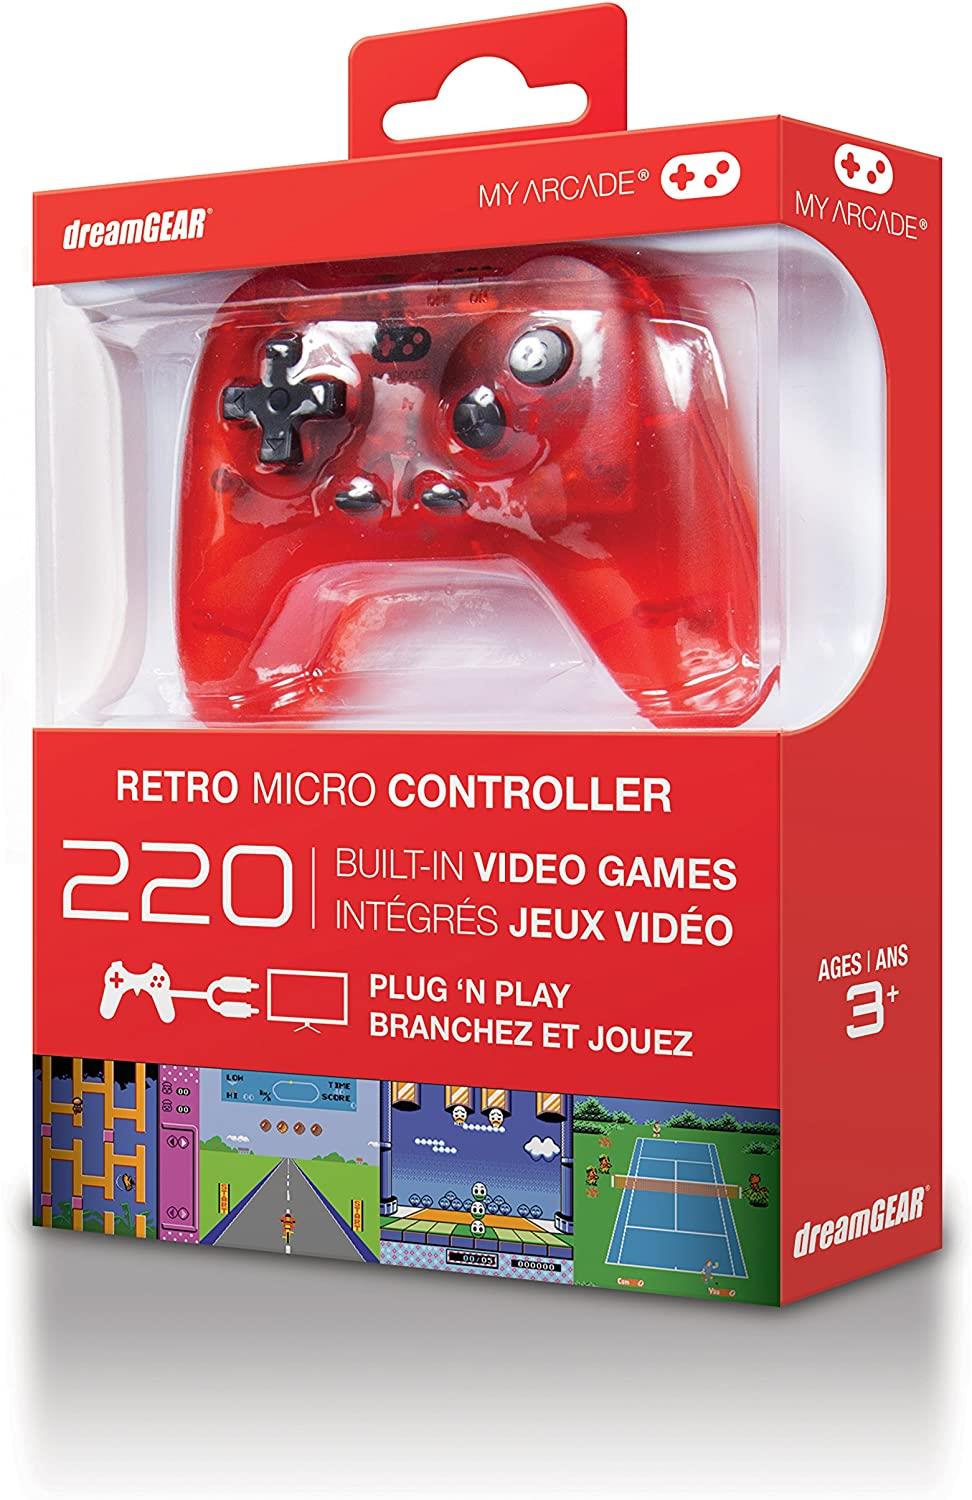 My Arcade - Retro Micro Controller with 220 Built-in Video Games Transparent Red